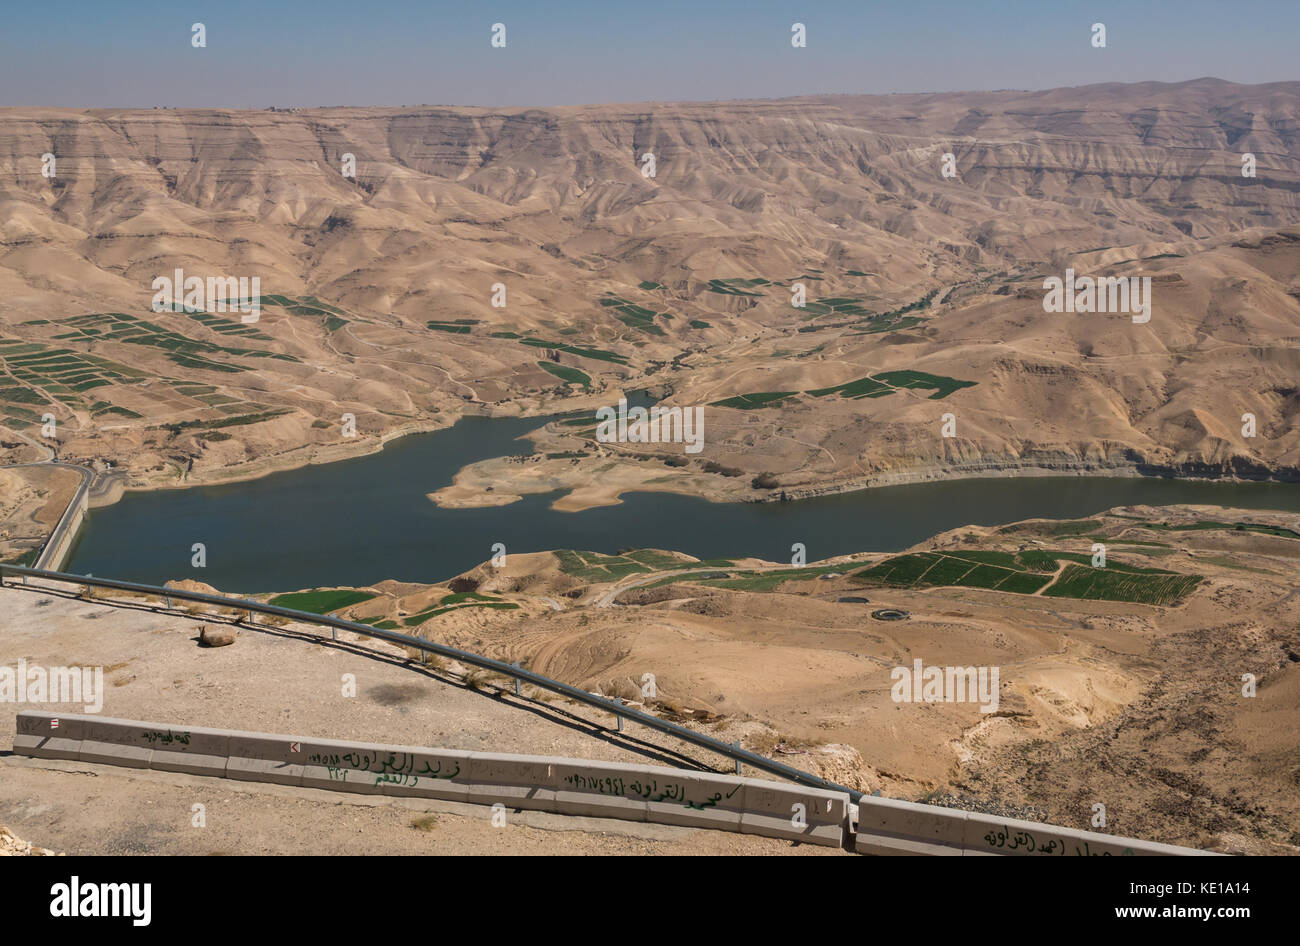 Landscape view of Wadi Mujib dam  and desert valley with reservoir, King's Highway, Jordan, Middle East Stock Photo